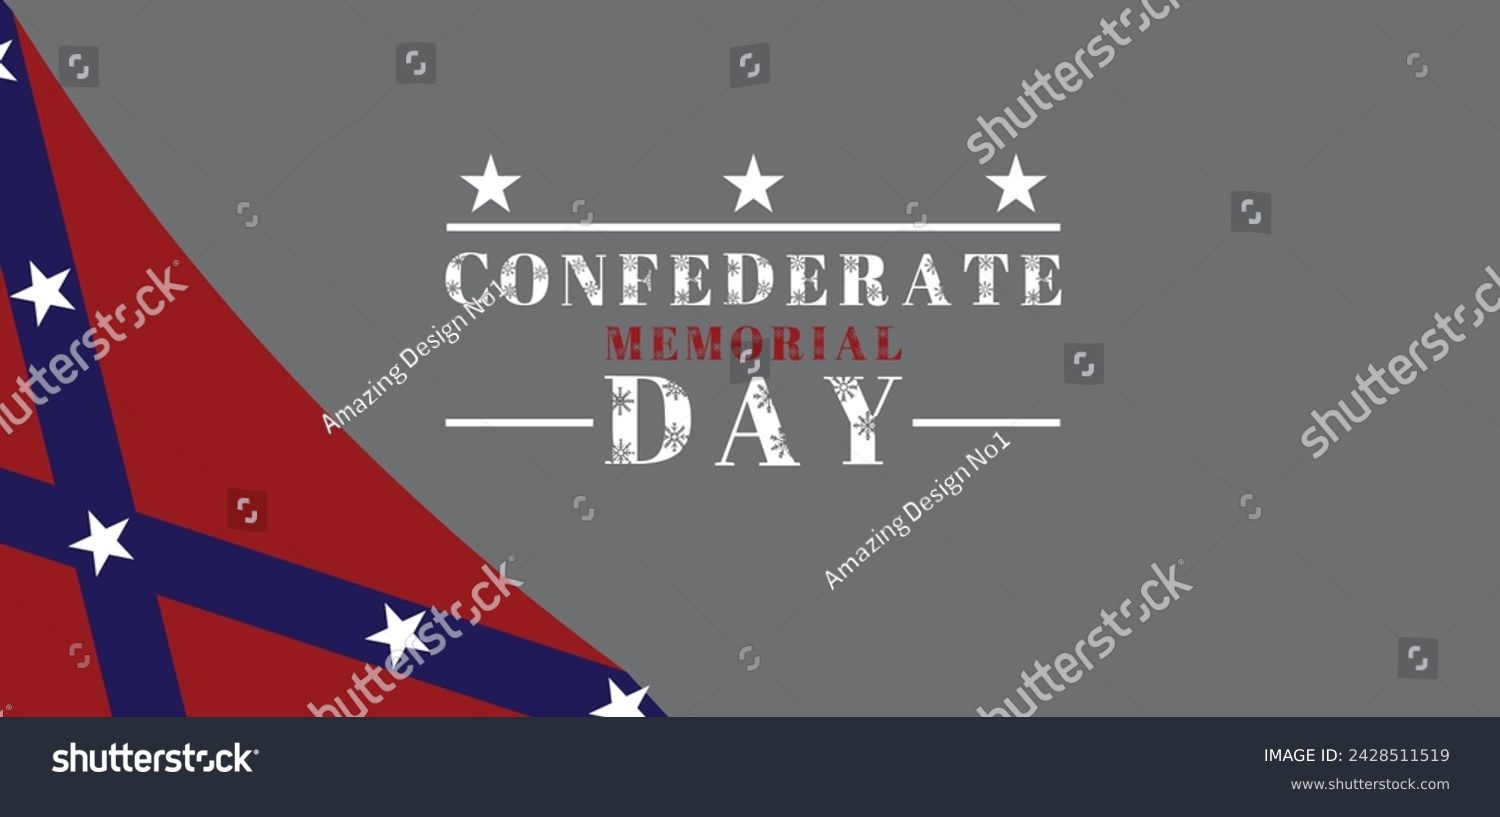 SVG of CONFEDERATE Memorial Day wallpapers and backgrounds you can download and use on your smartphone, tablet, or computer. svg